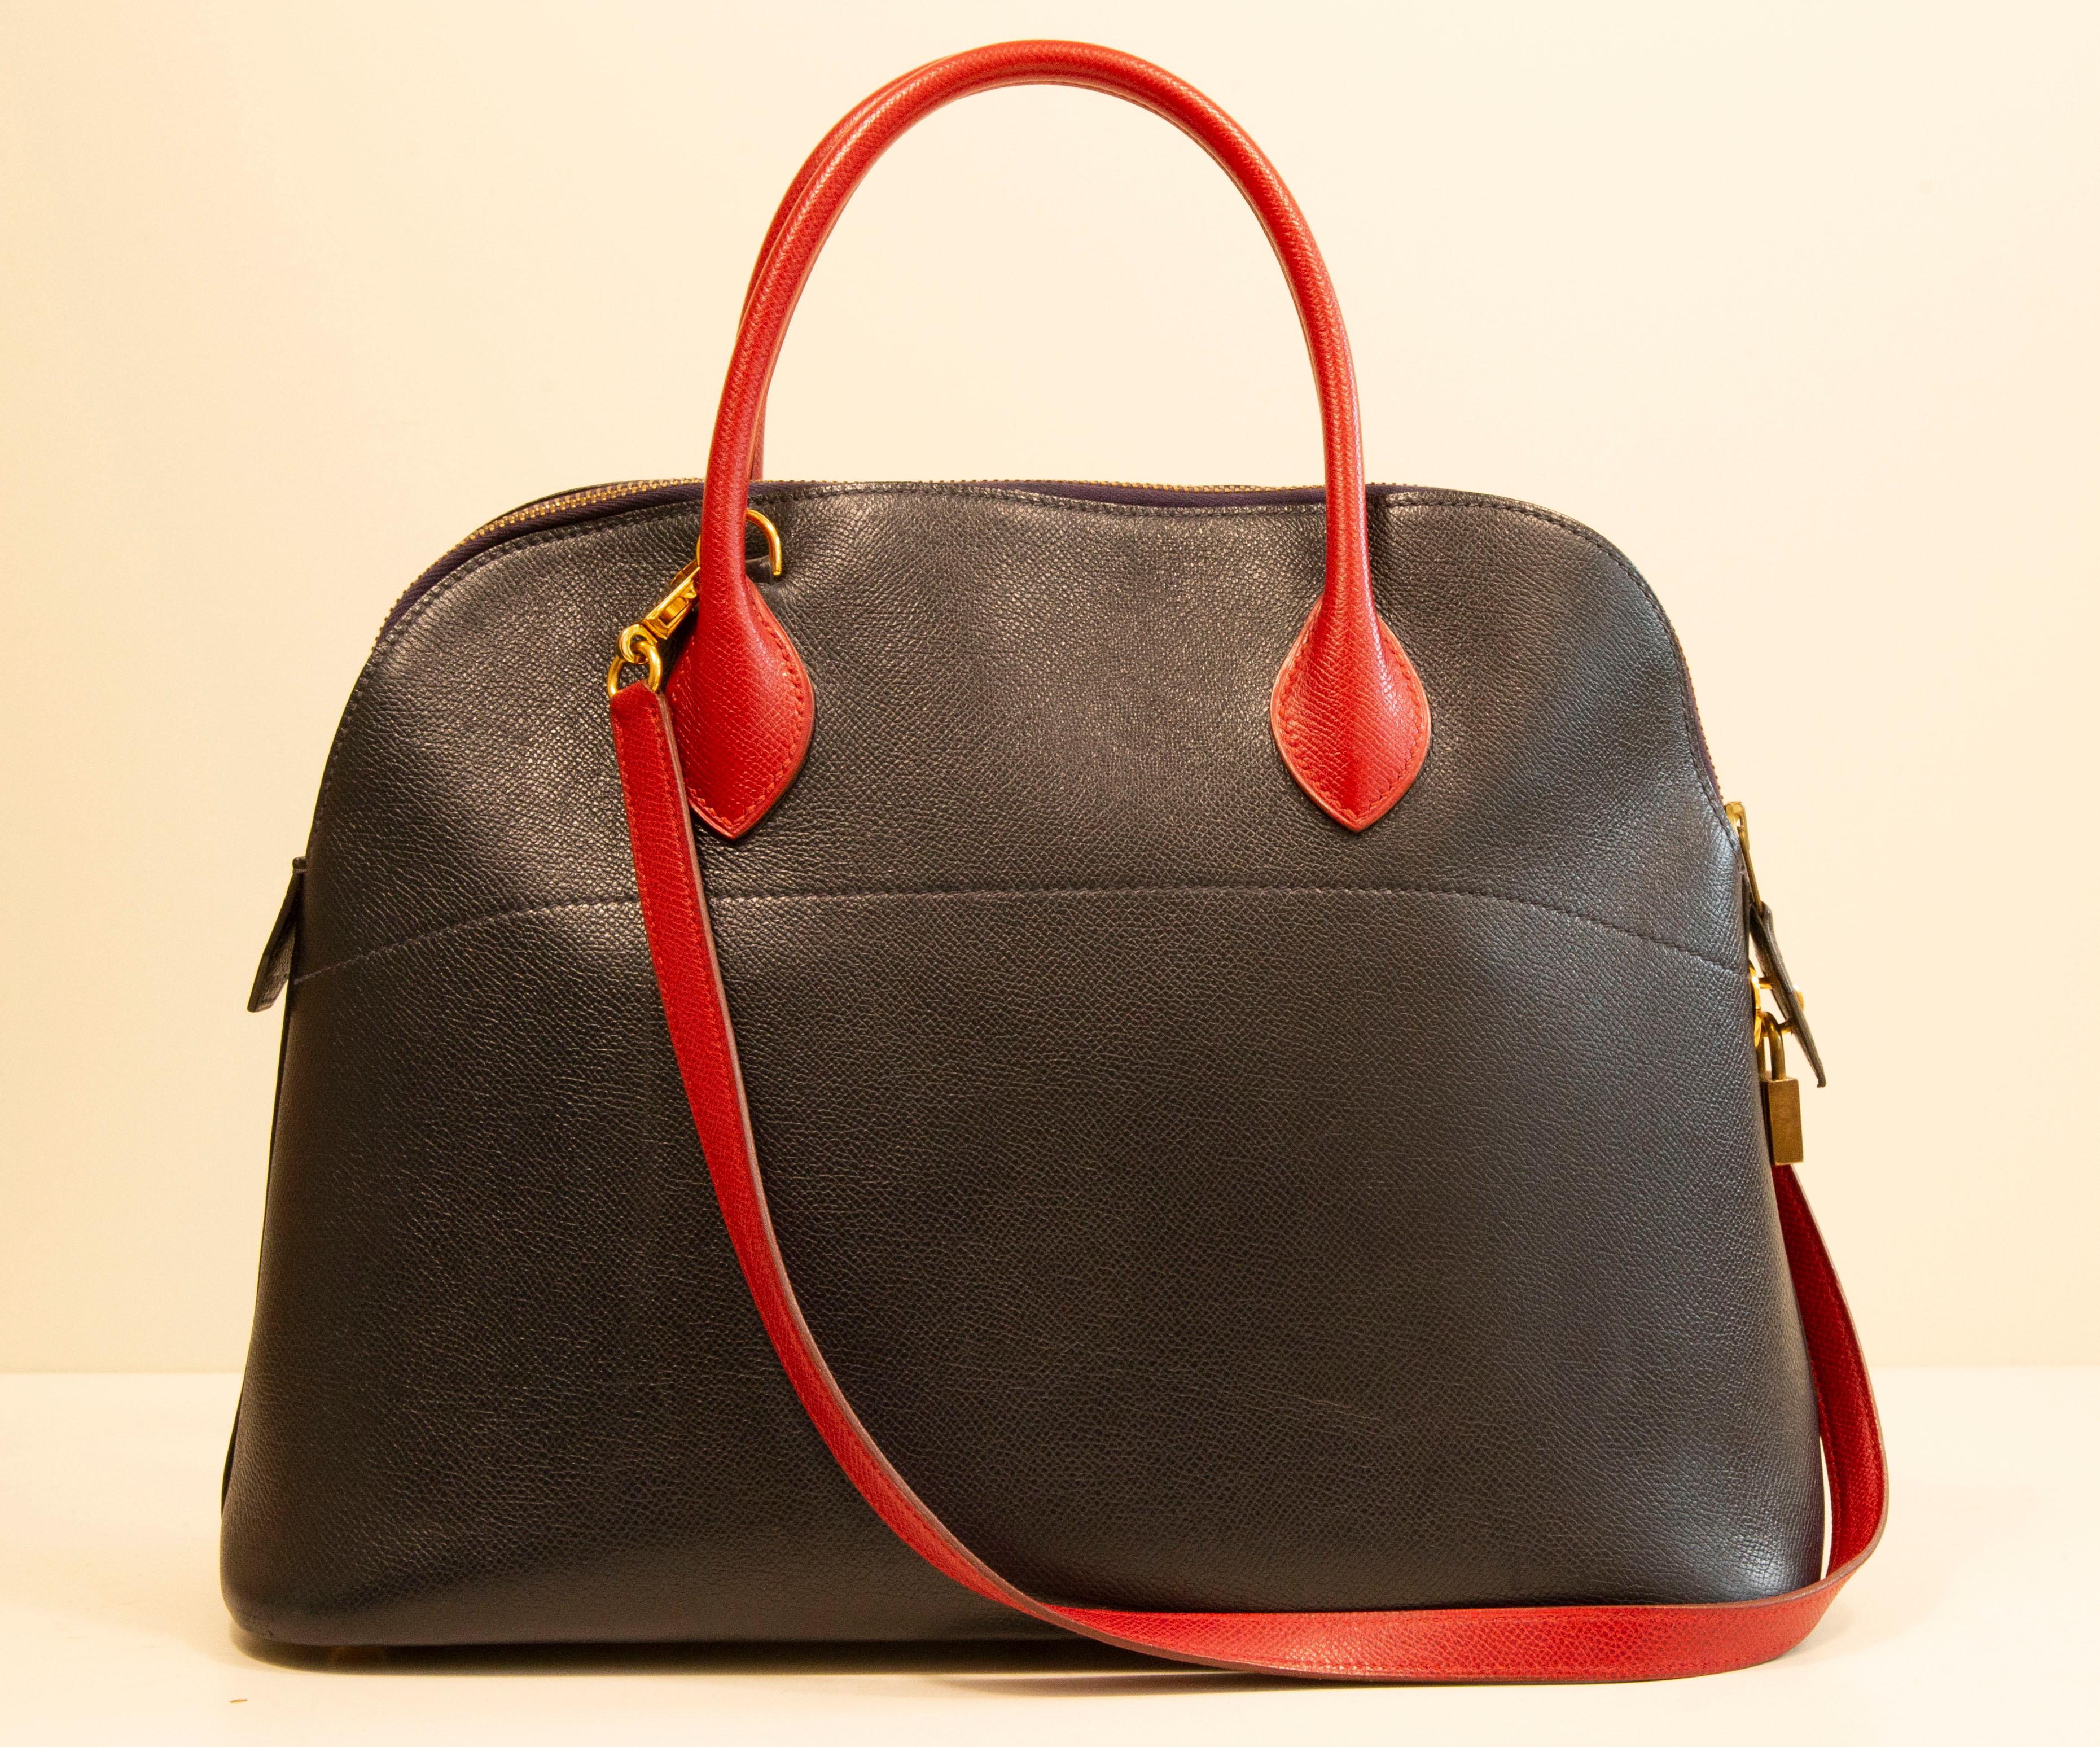 1990s Hermes Bolide 35 Bag in Navy Blue and Red Leather For Sale 2